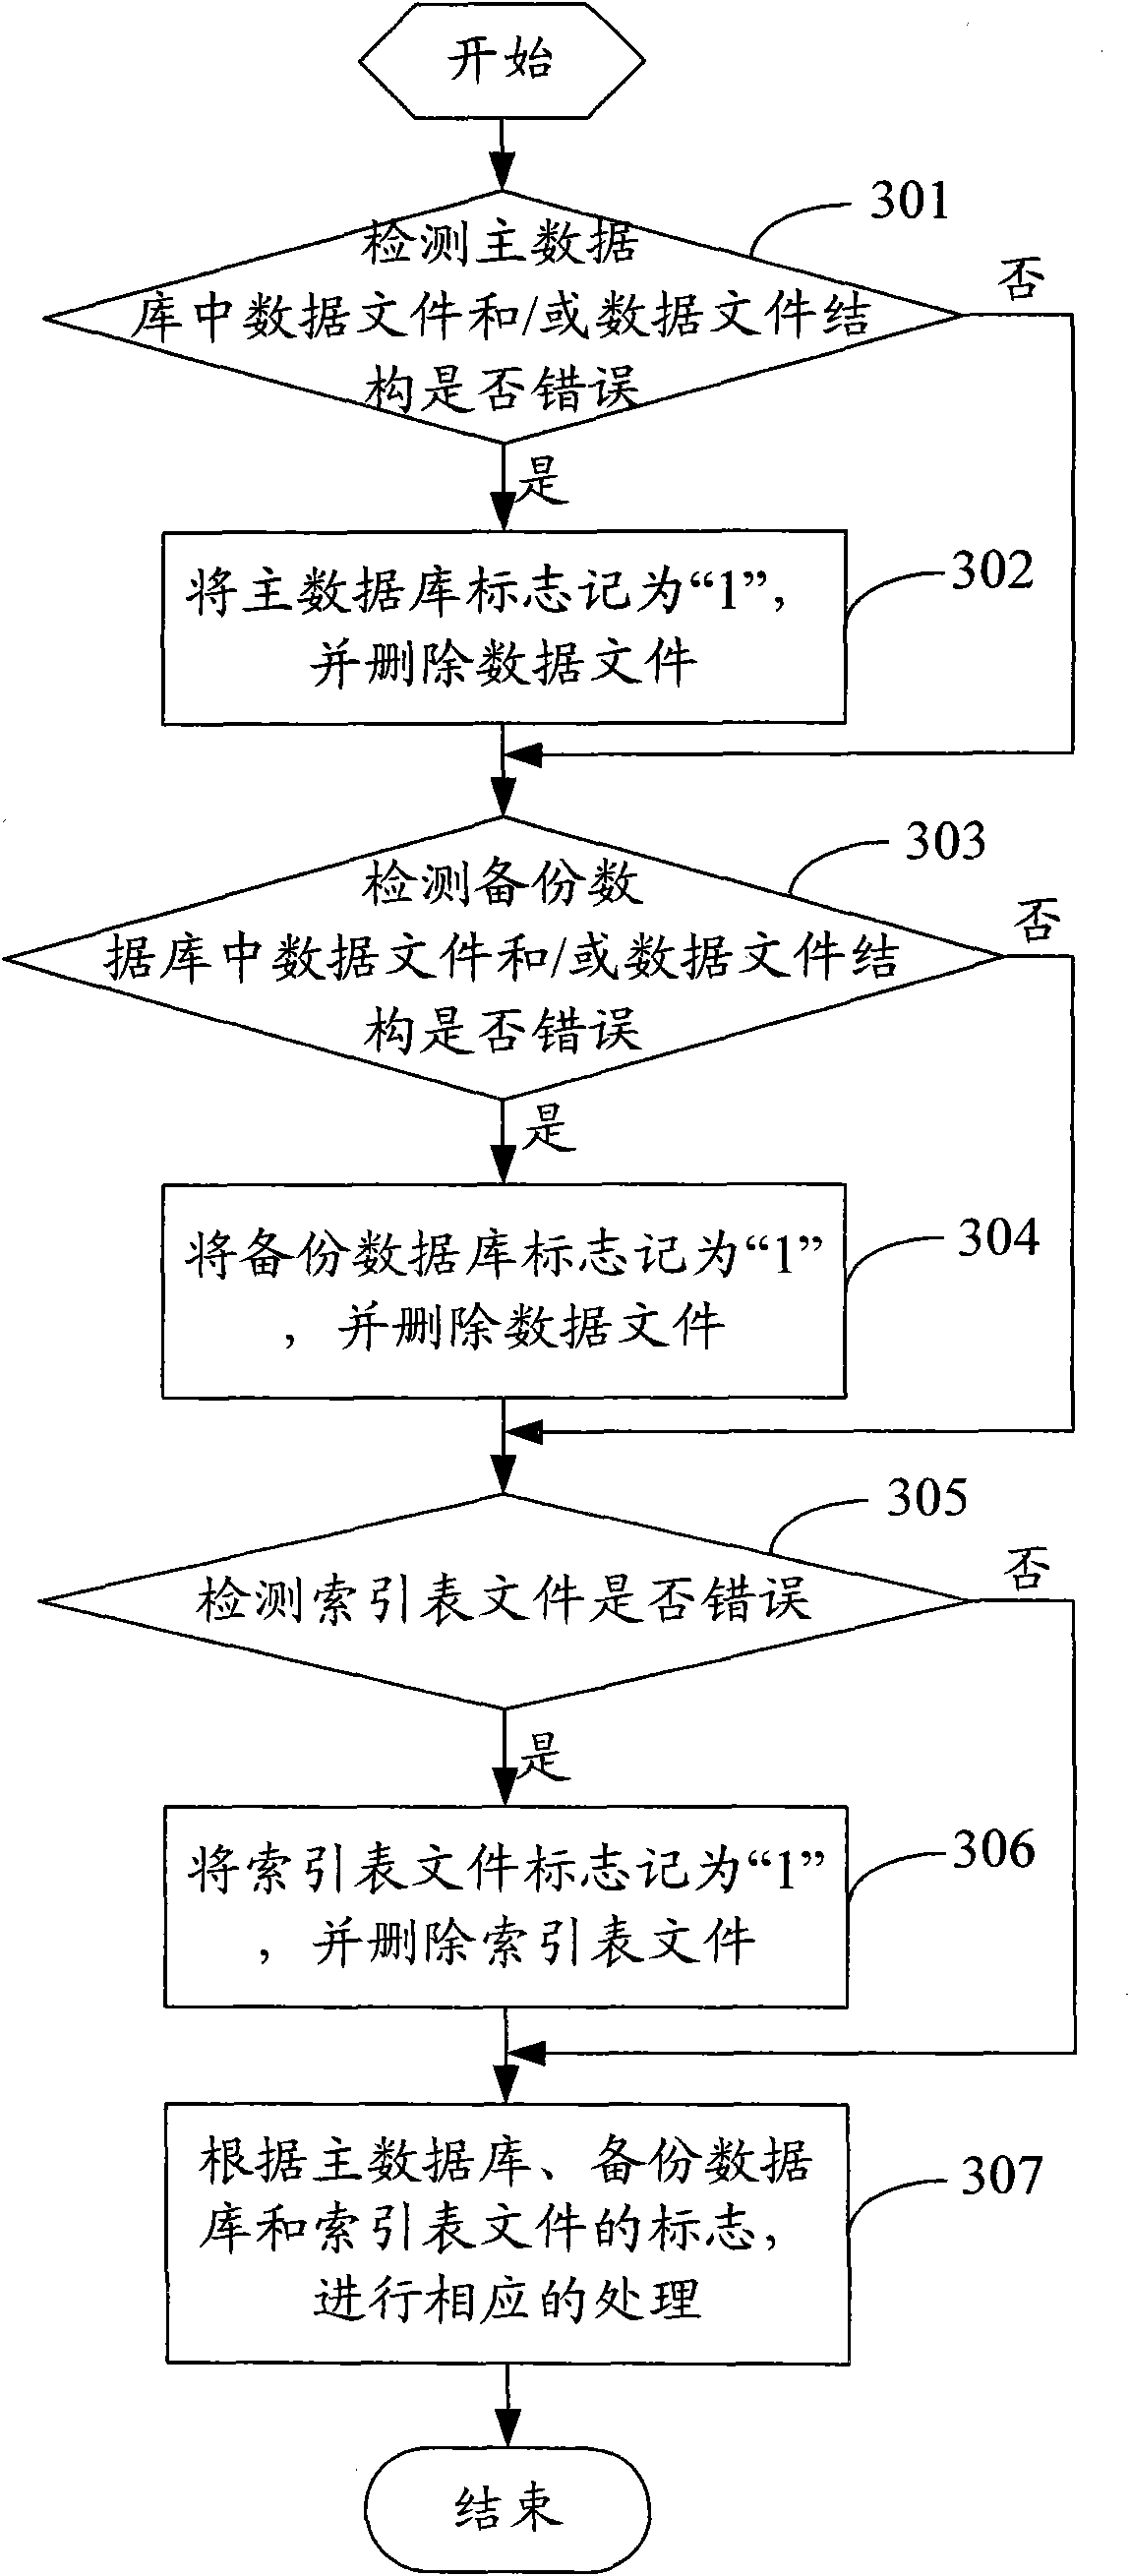 Method and device for restoring data in embedded database